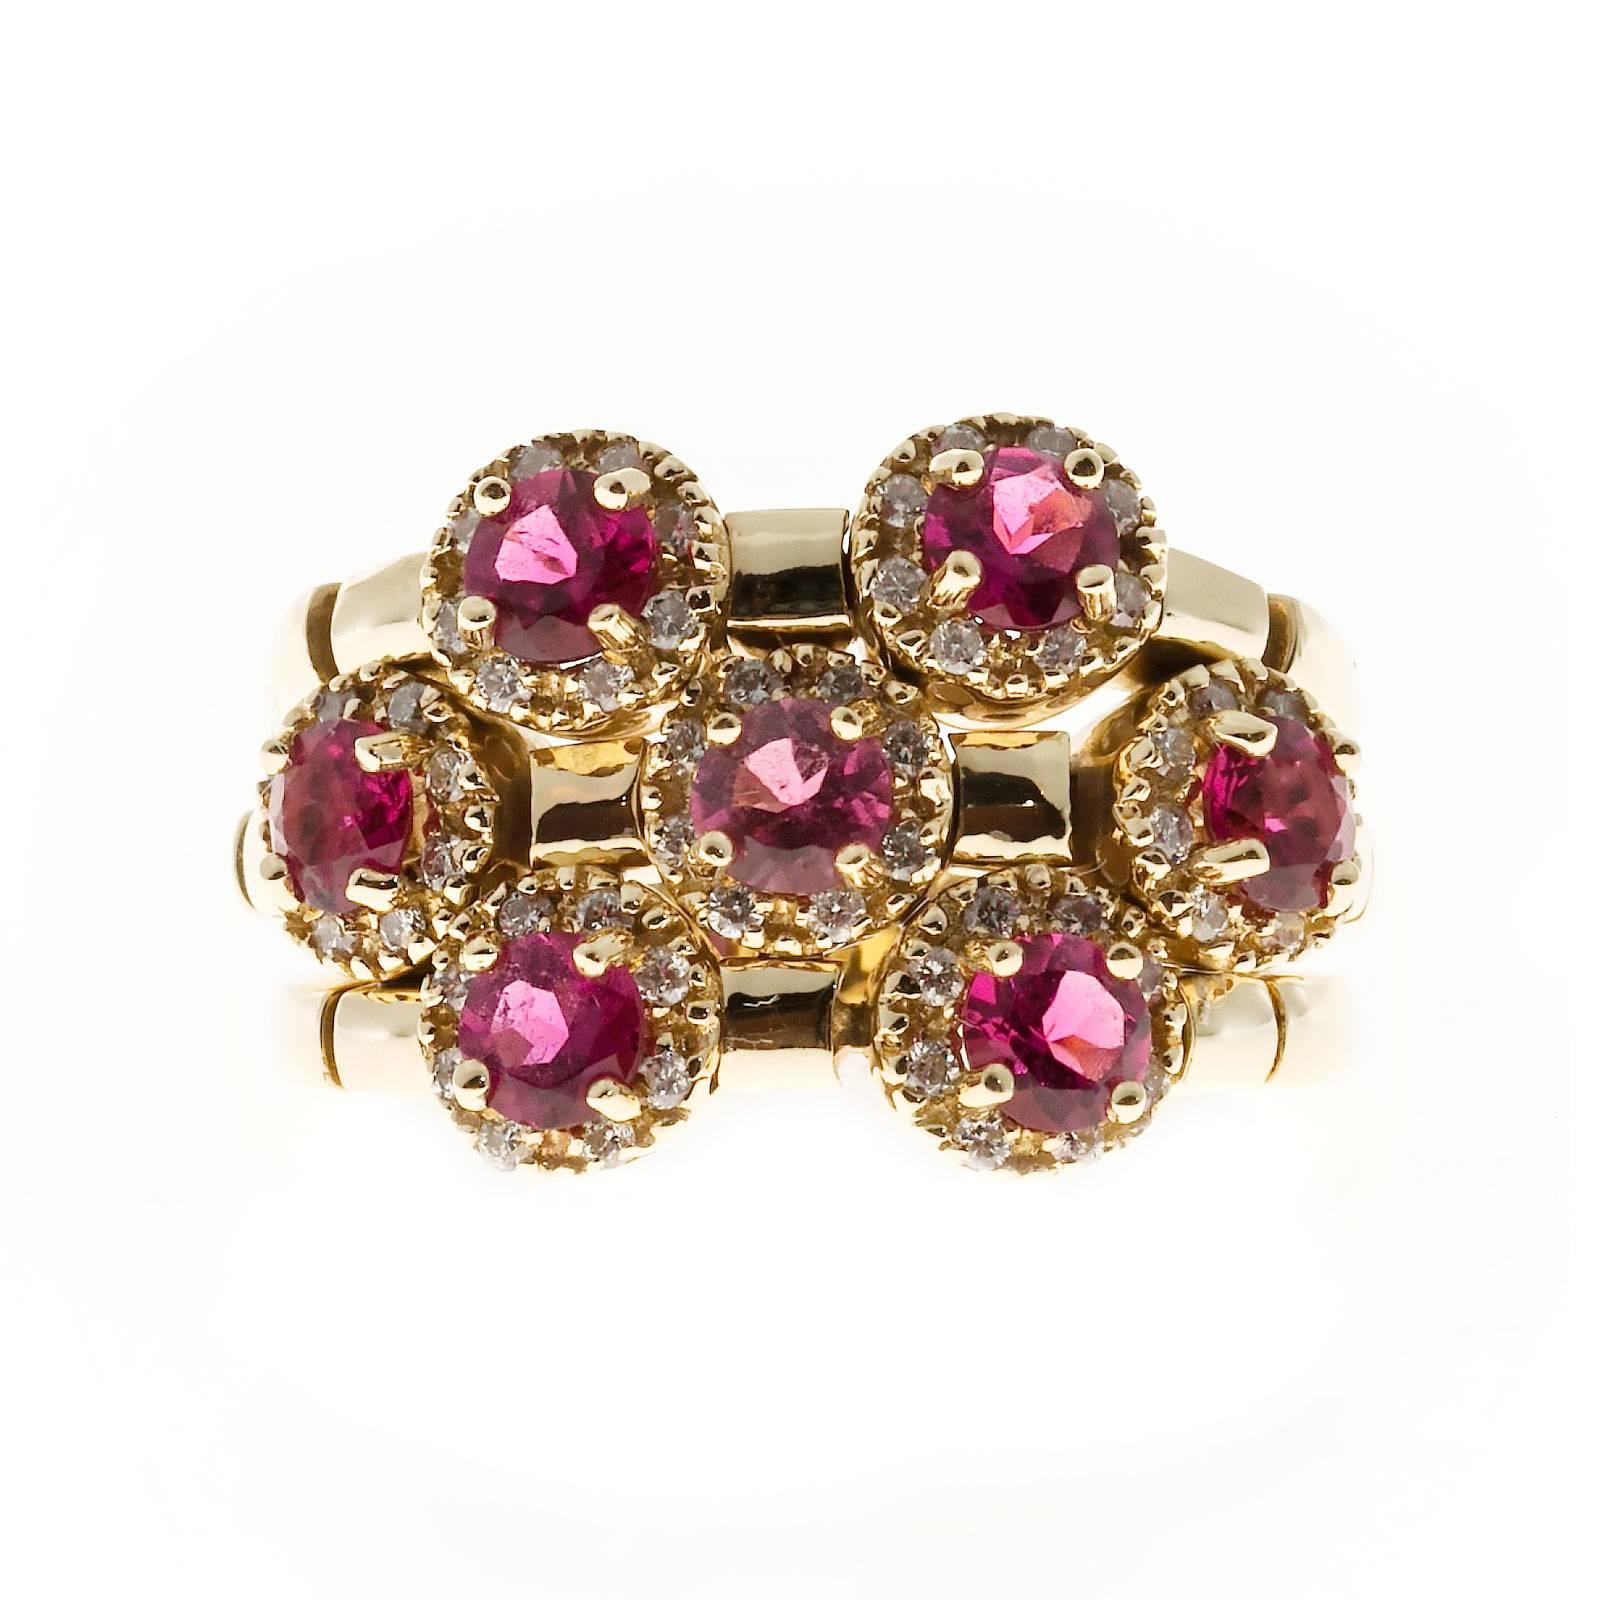  Sonia B Red Rubellite Diamond Gold Flex Ring. Set with bright red Rubellite's surrounded in a halos of full cut diamonds. 

56 full cut diamonds approx. total weight .42cts, G-H, SI1
7, 1.56ct 3.2mm fine red Rubellite
Stamped: 14k Sonia B
12.2